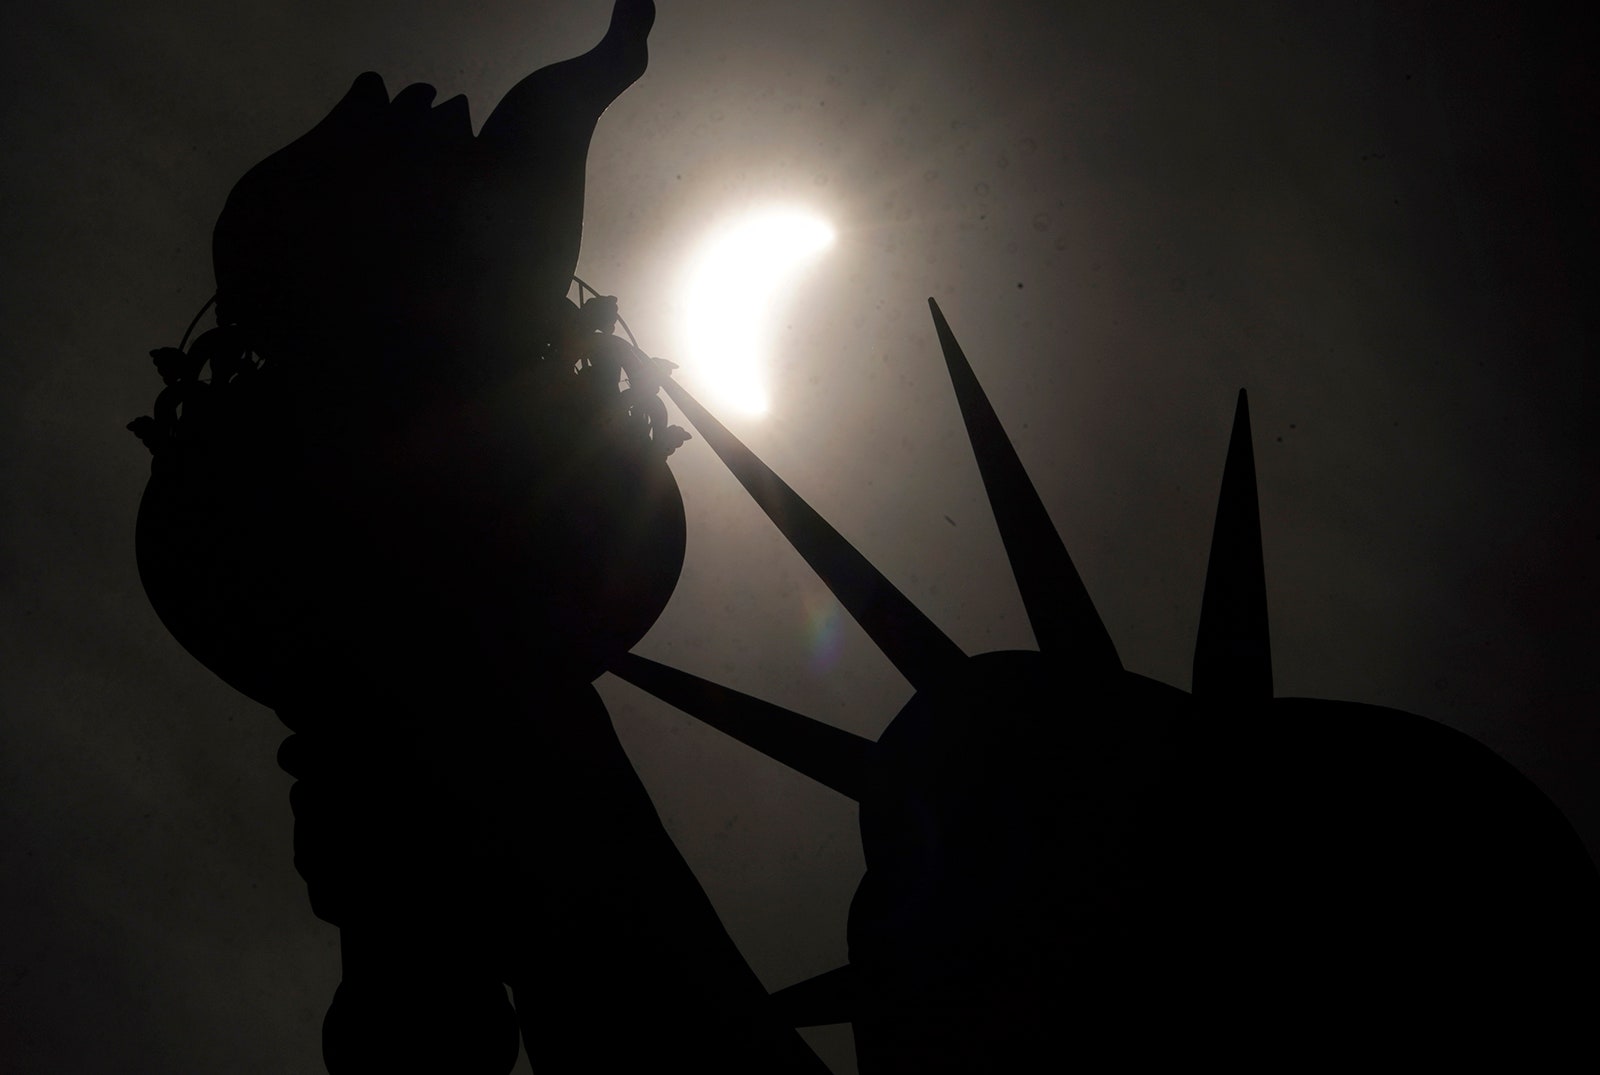 Photo of a partial solar eclipse moving across the sky near the Crown of the Statue of Liberty on Liberty Island